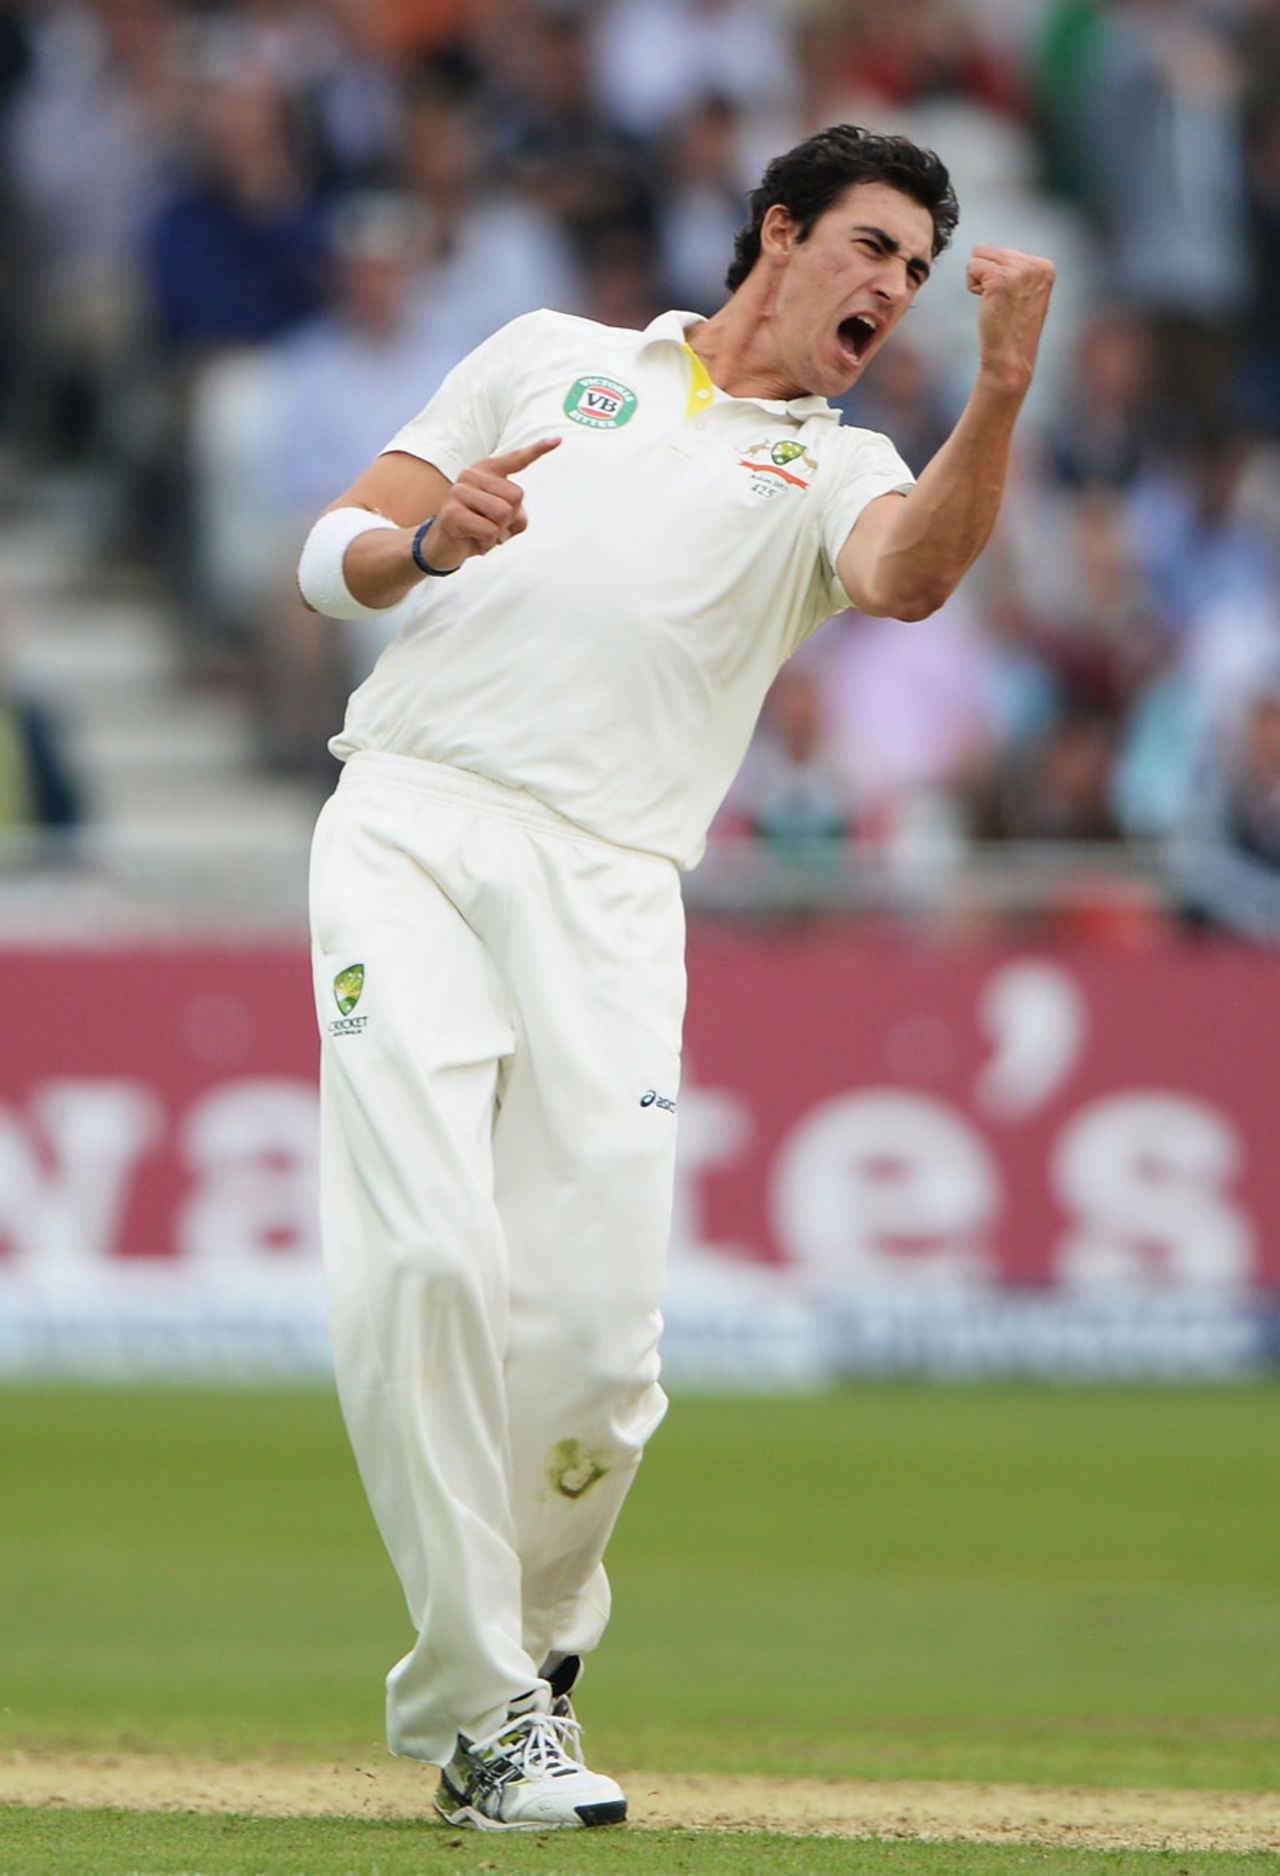 Mitchell Starc claimed two wickets in two balls, England v Australia, 1st Investec Test, Trent Bridge, 1st day, July 10, 2013